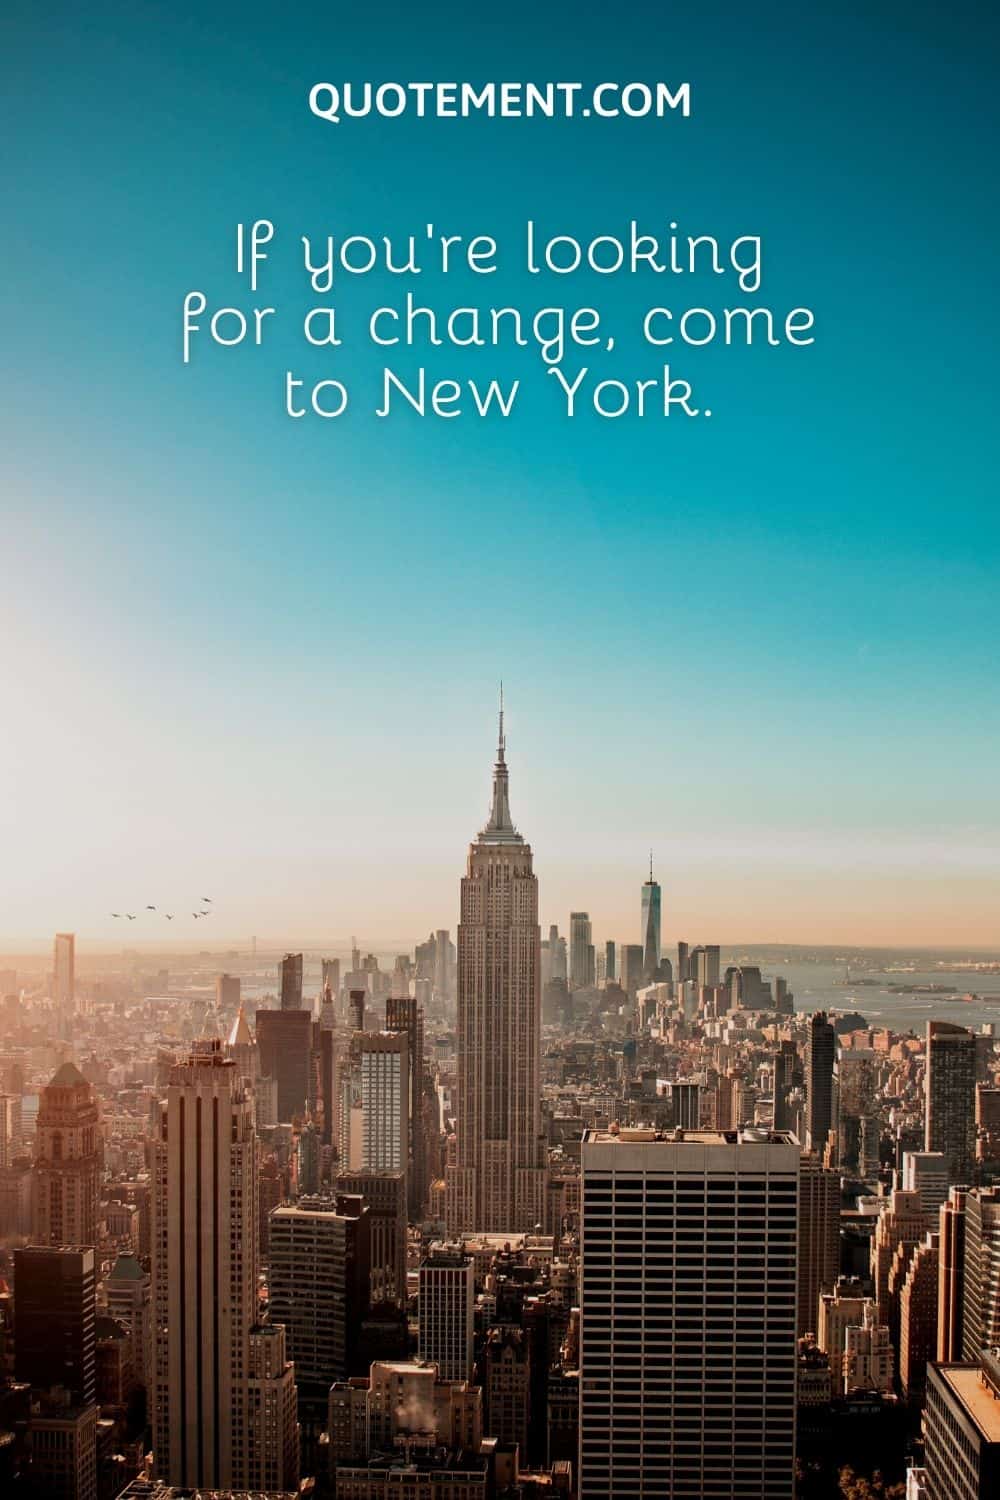 If you're looking for a change, come to New York